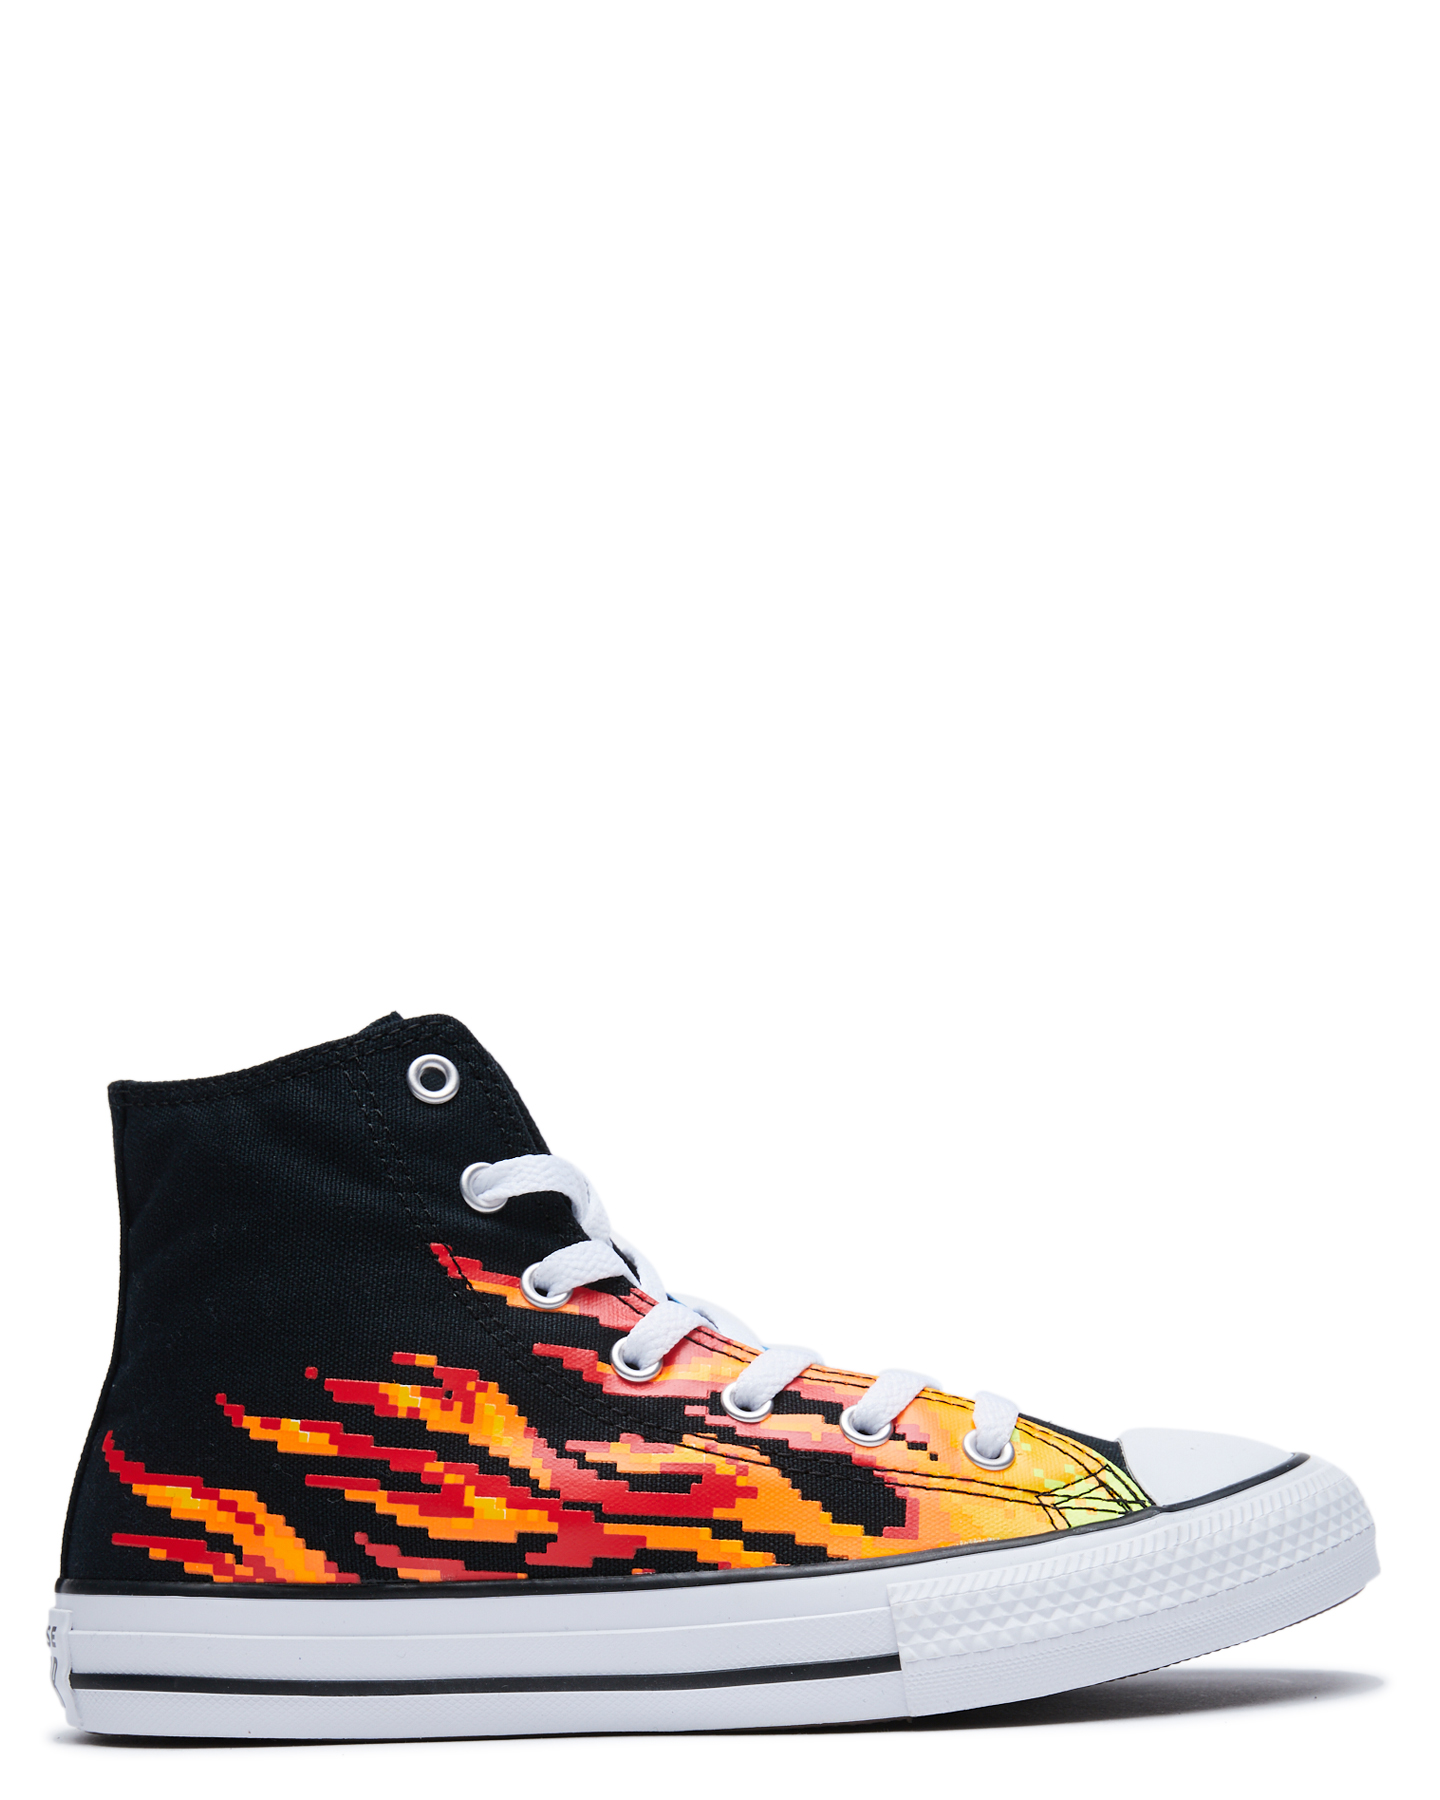 converse flame shoes